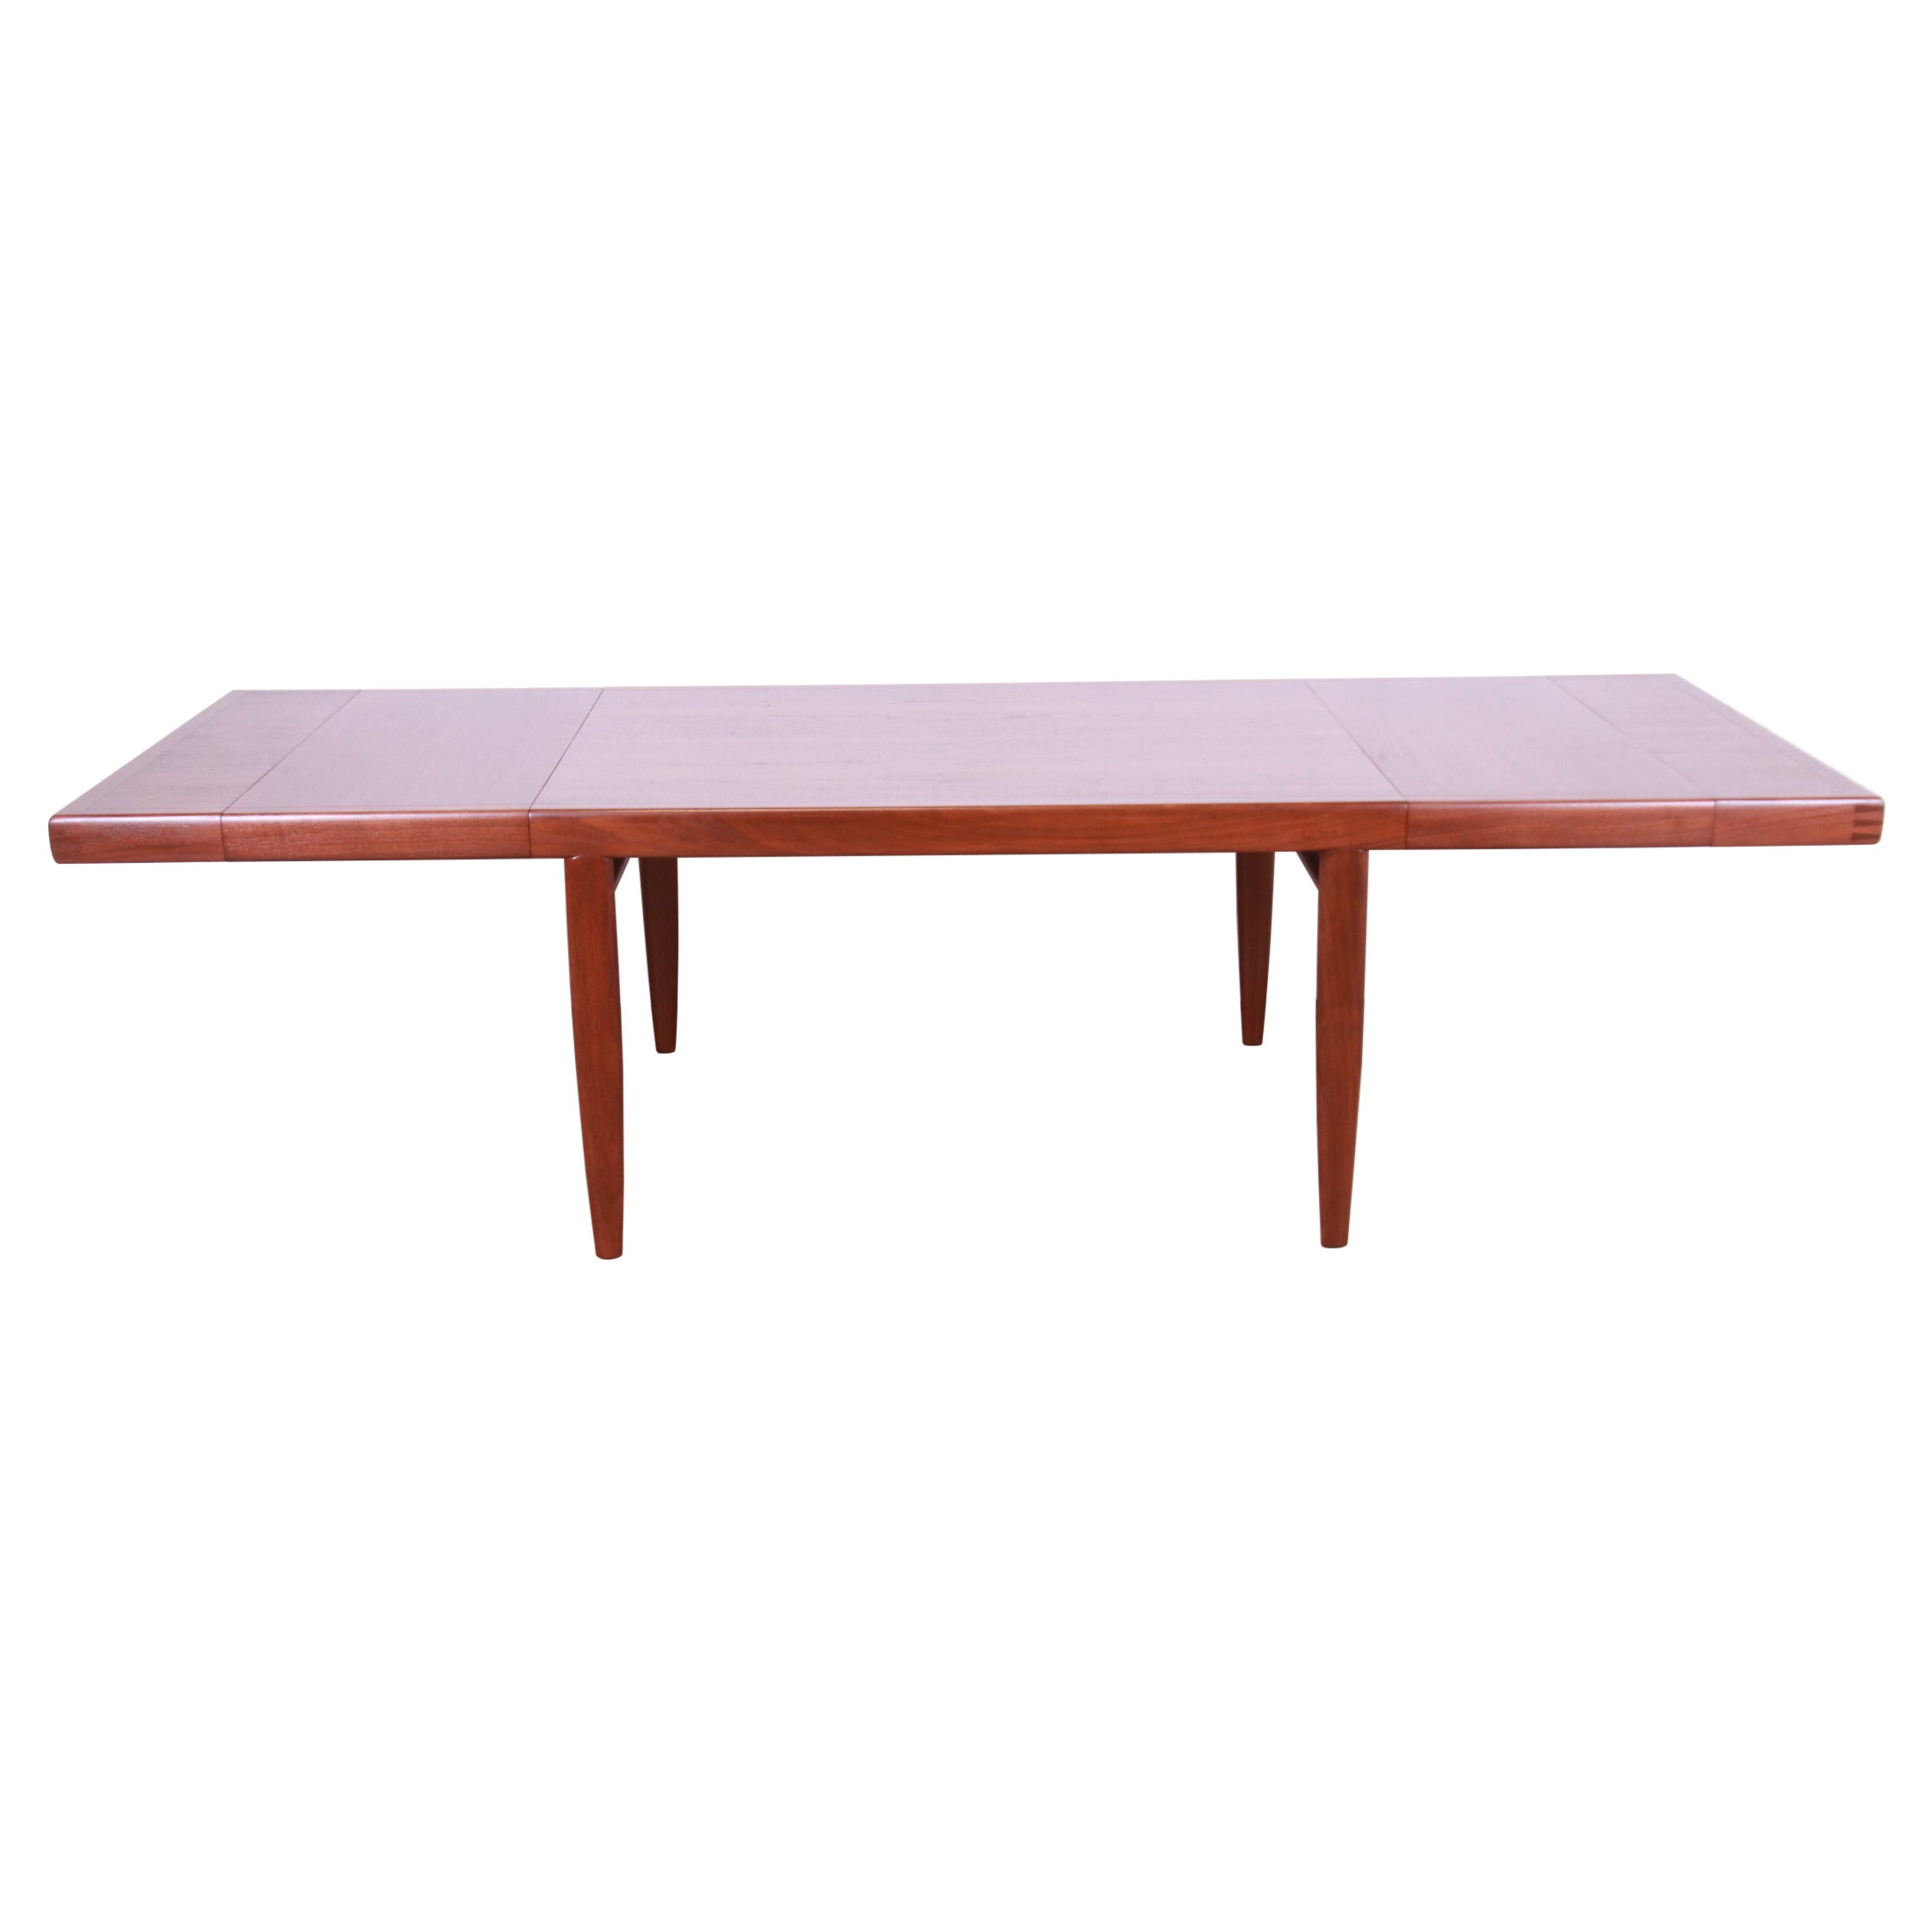 George Nakashima for Widdicomb Origins Collection Walnut Dining Table, 1958